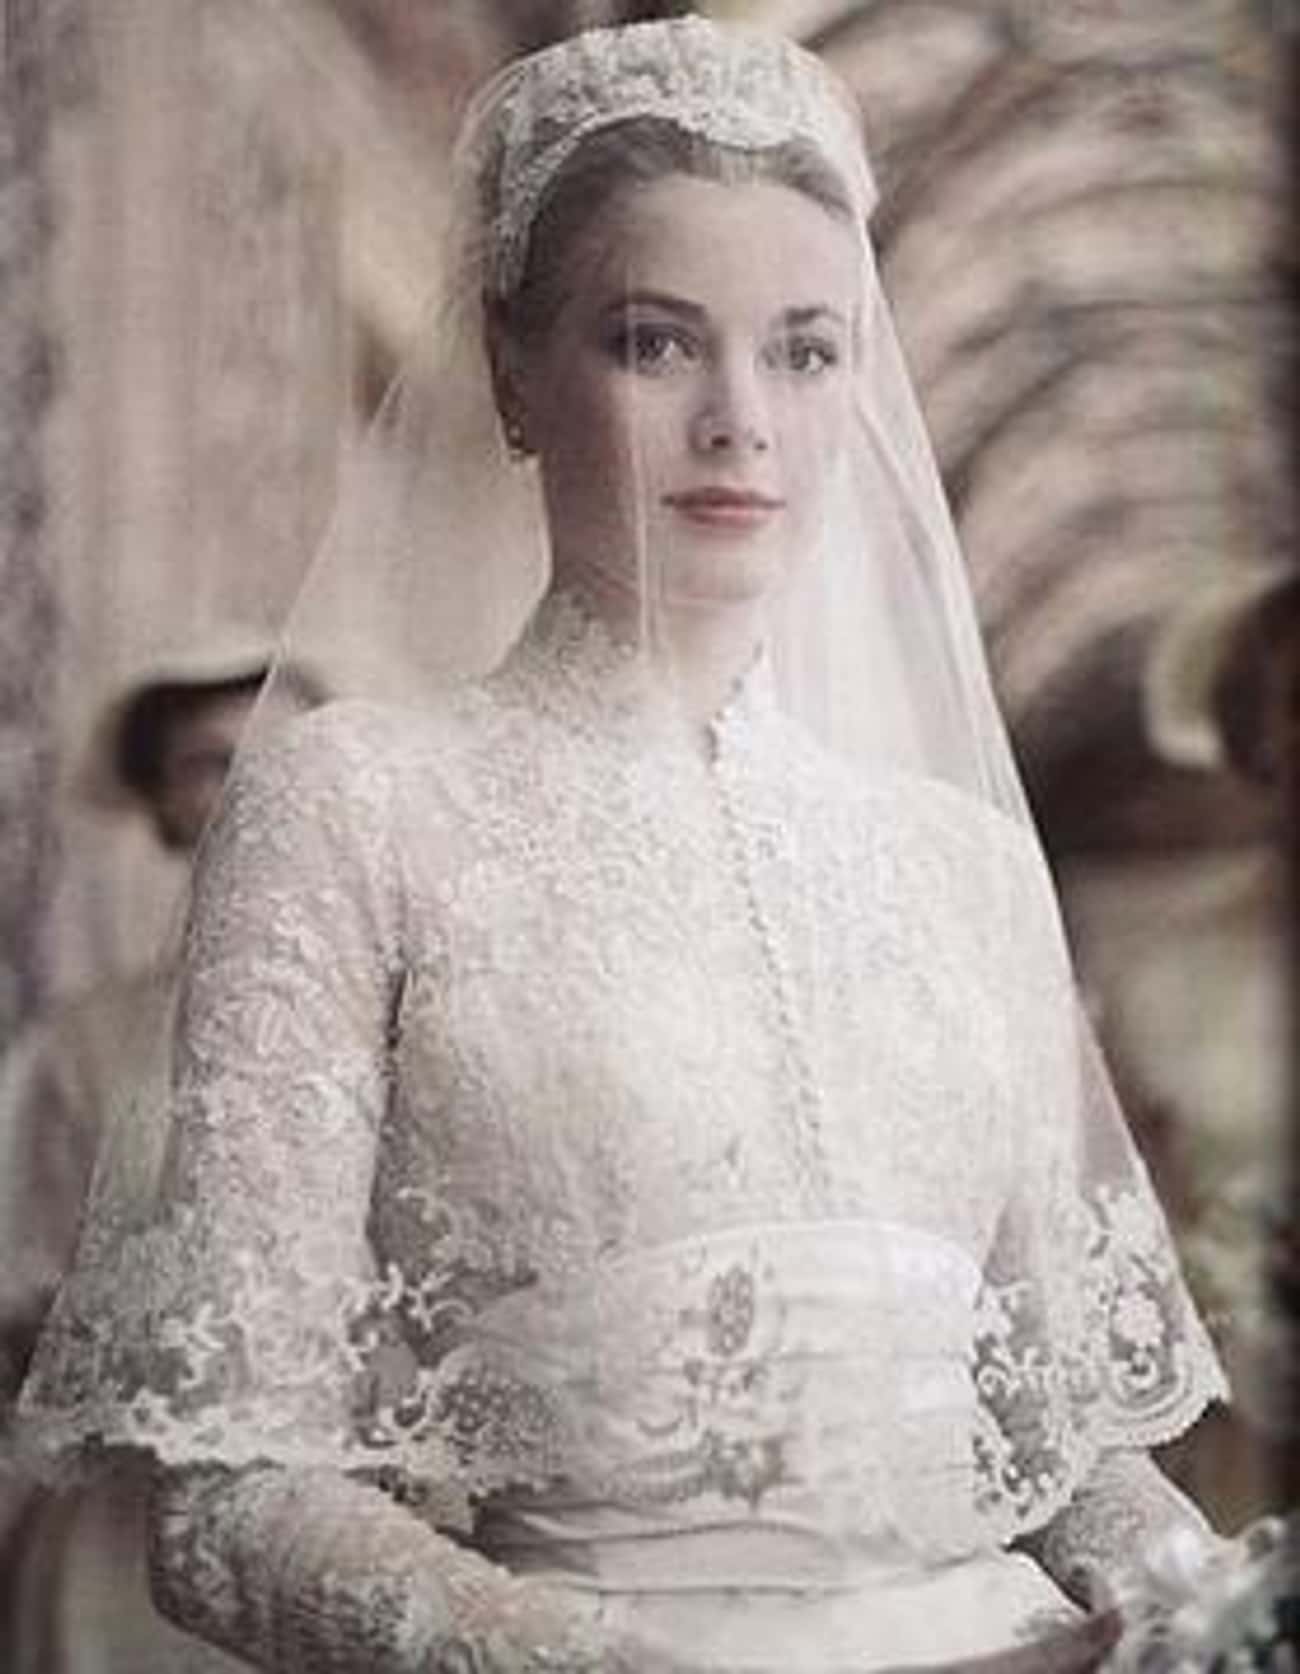 She Had To Pay $2 Million And Take A Fertility Test To Marry Prince Rainier